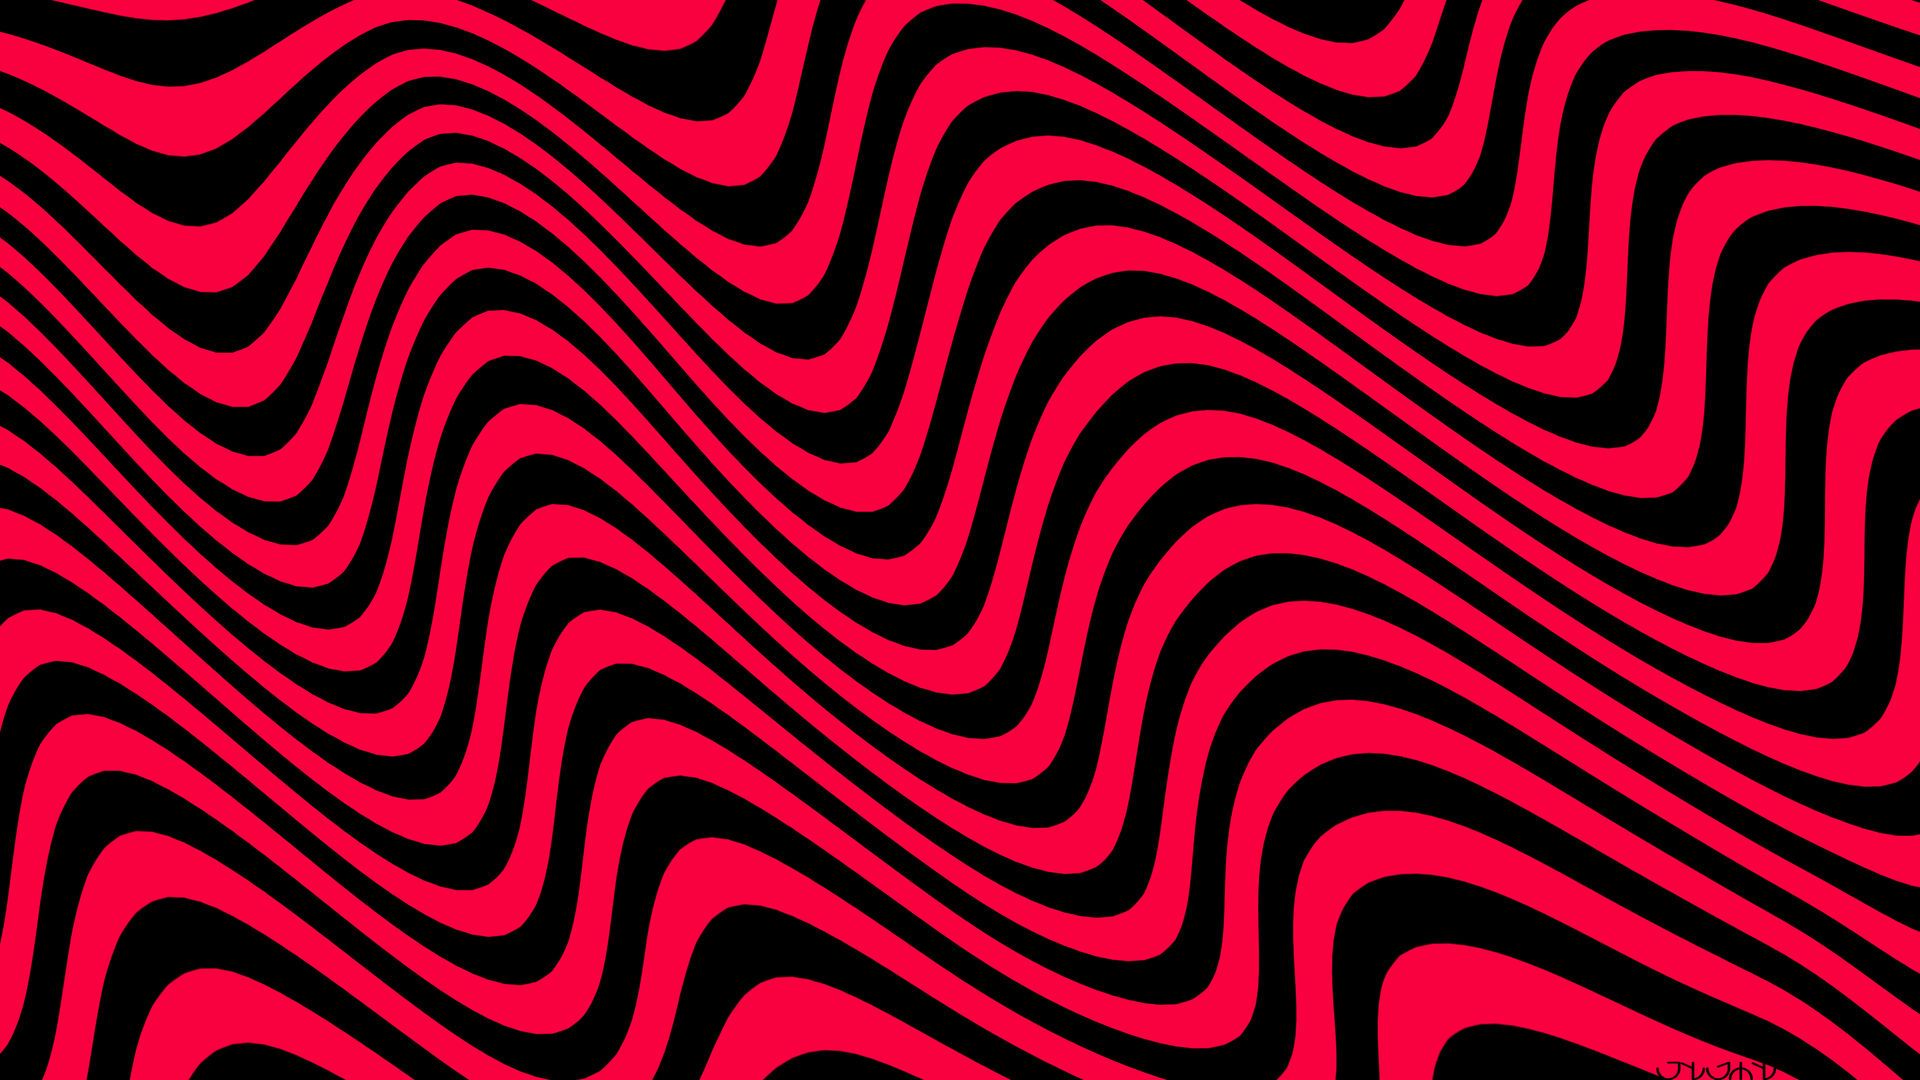 Psychedelic Black and Red [1920x1080][OC]. Red and black